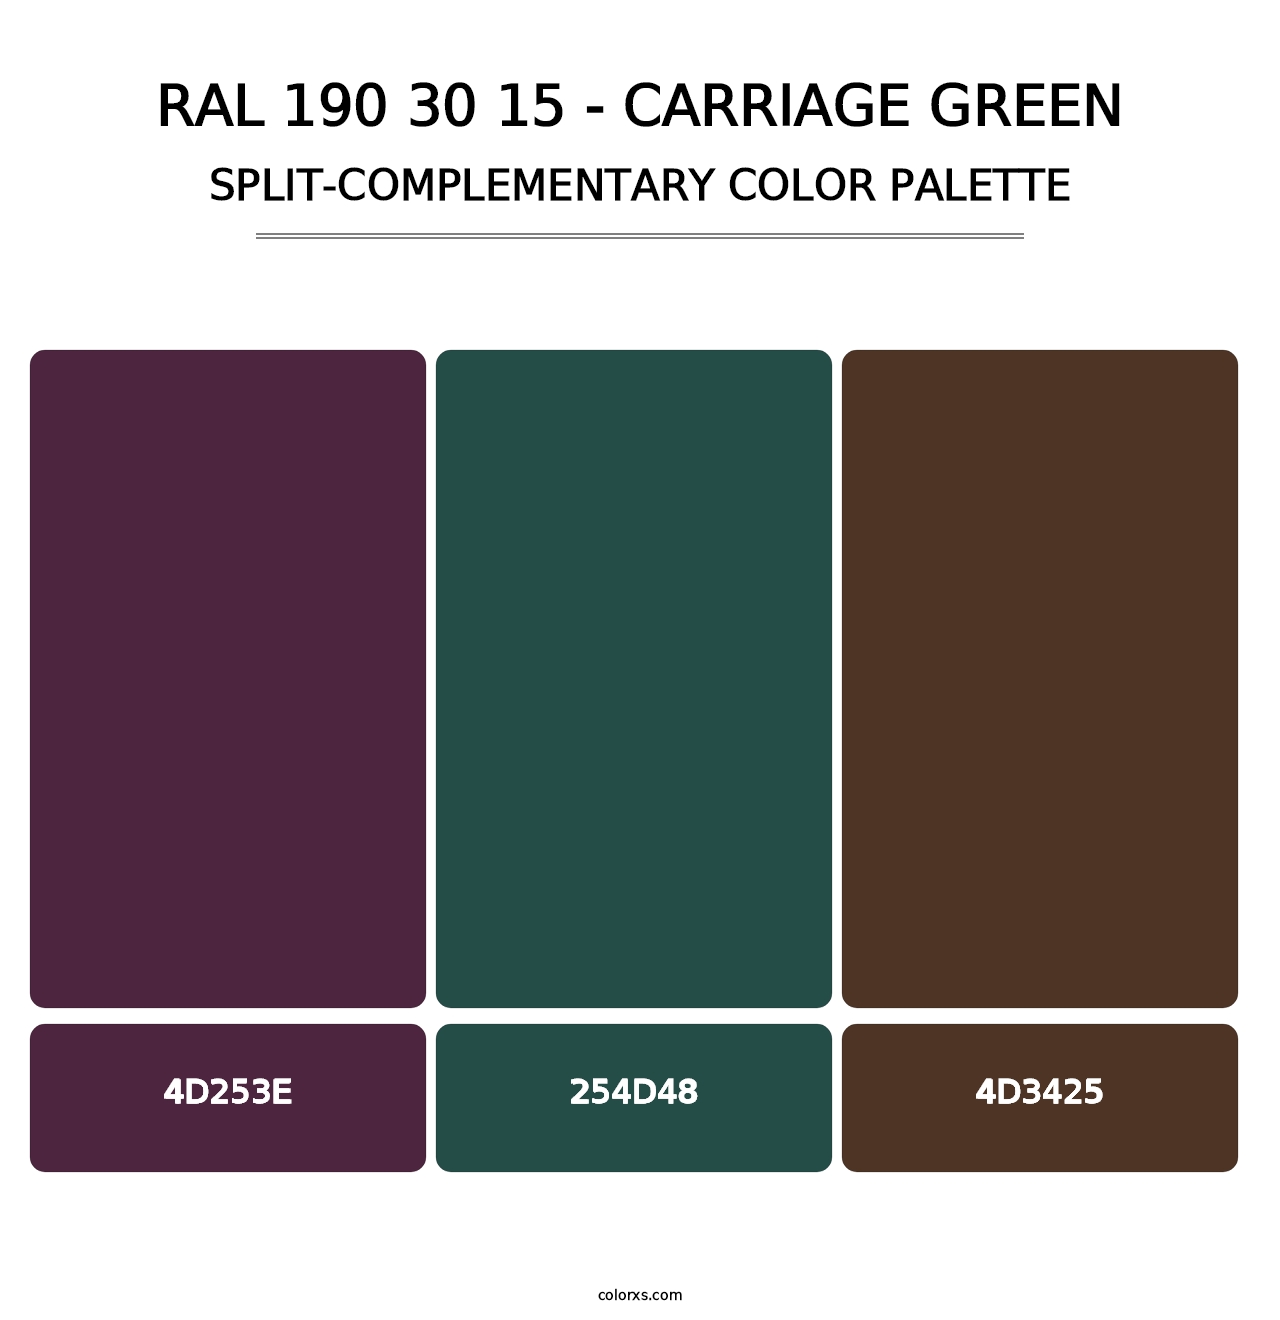 RAL 190 30 15 - Carriage Green - Split-Complementary Color Palette